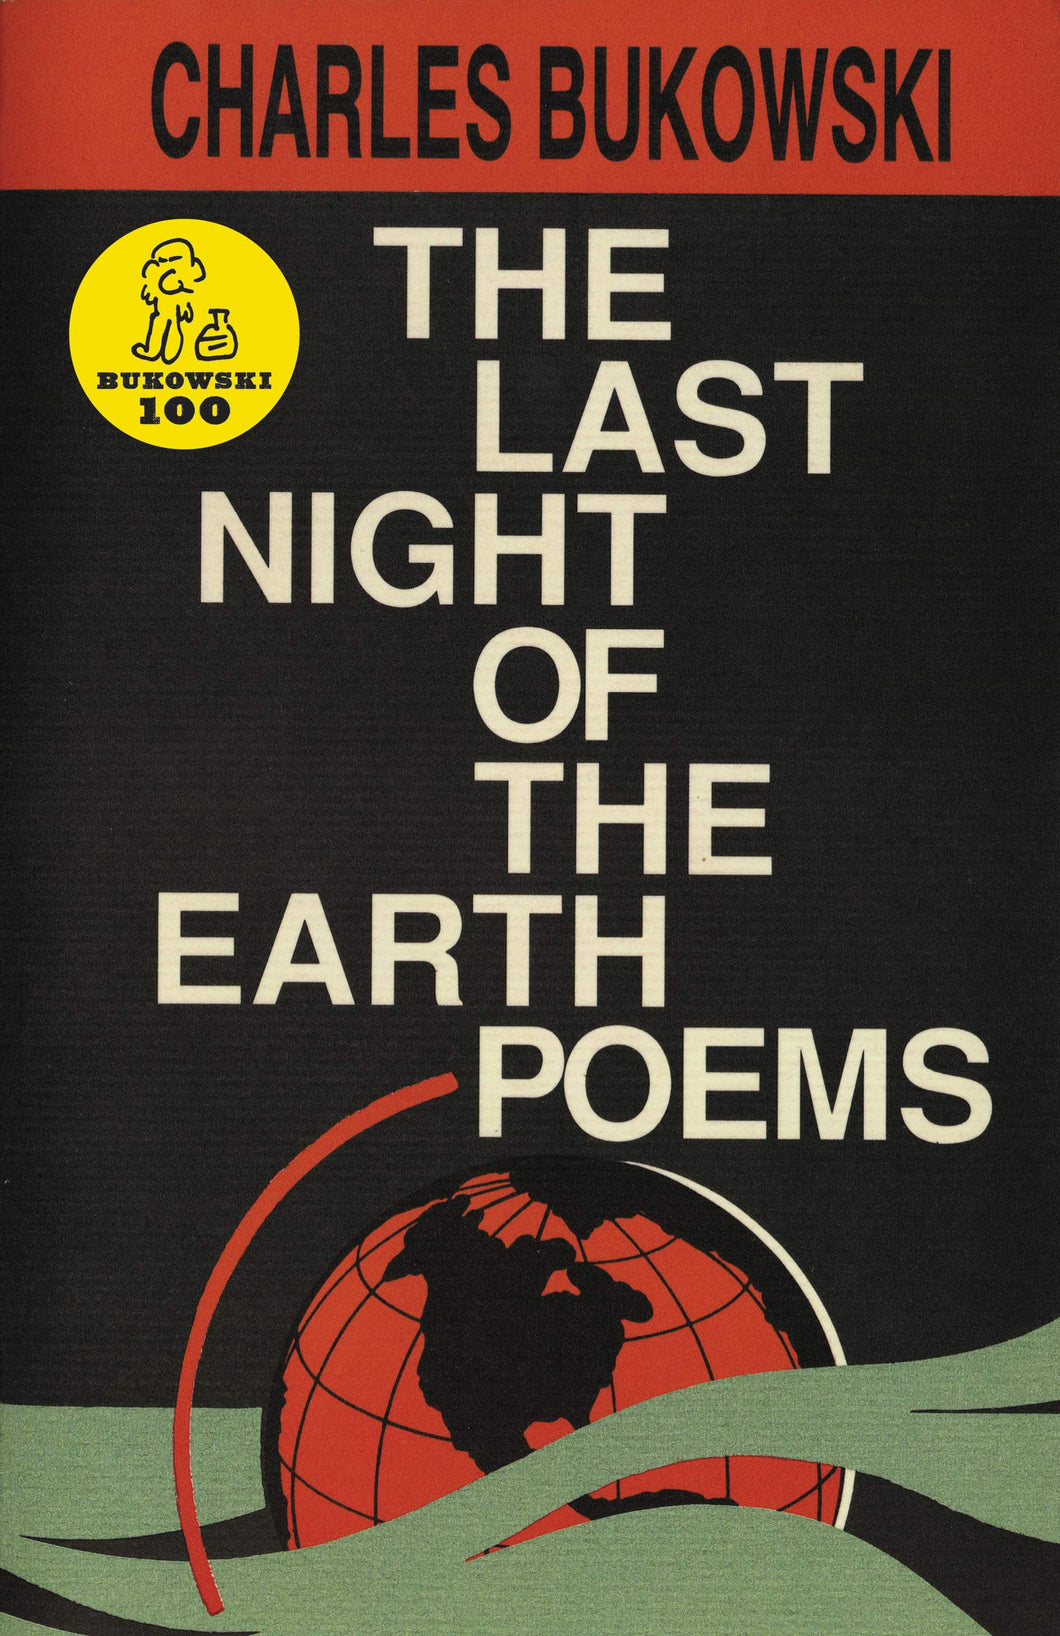 The Last Night of the Earth Poems by Charles Bukowski